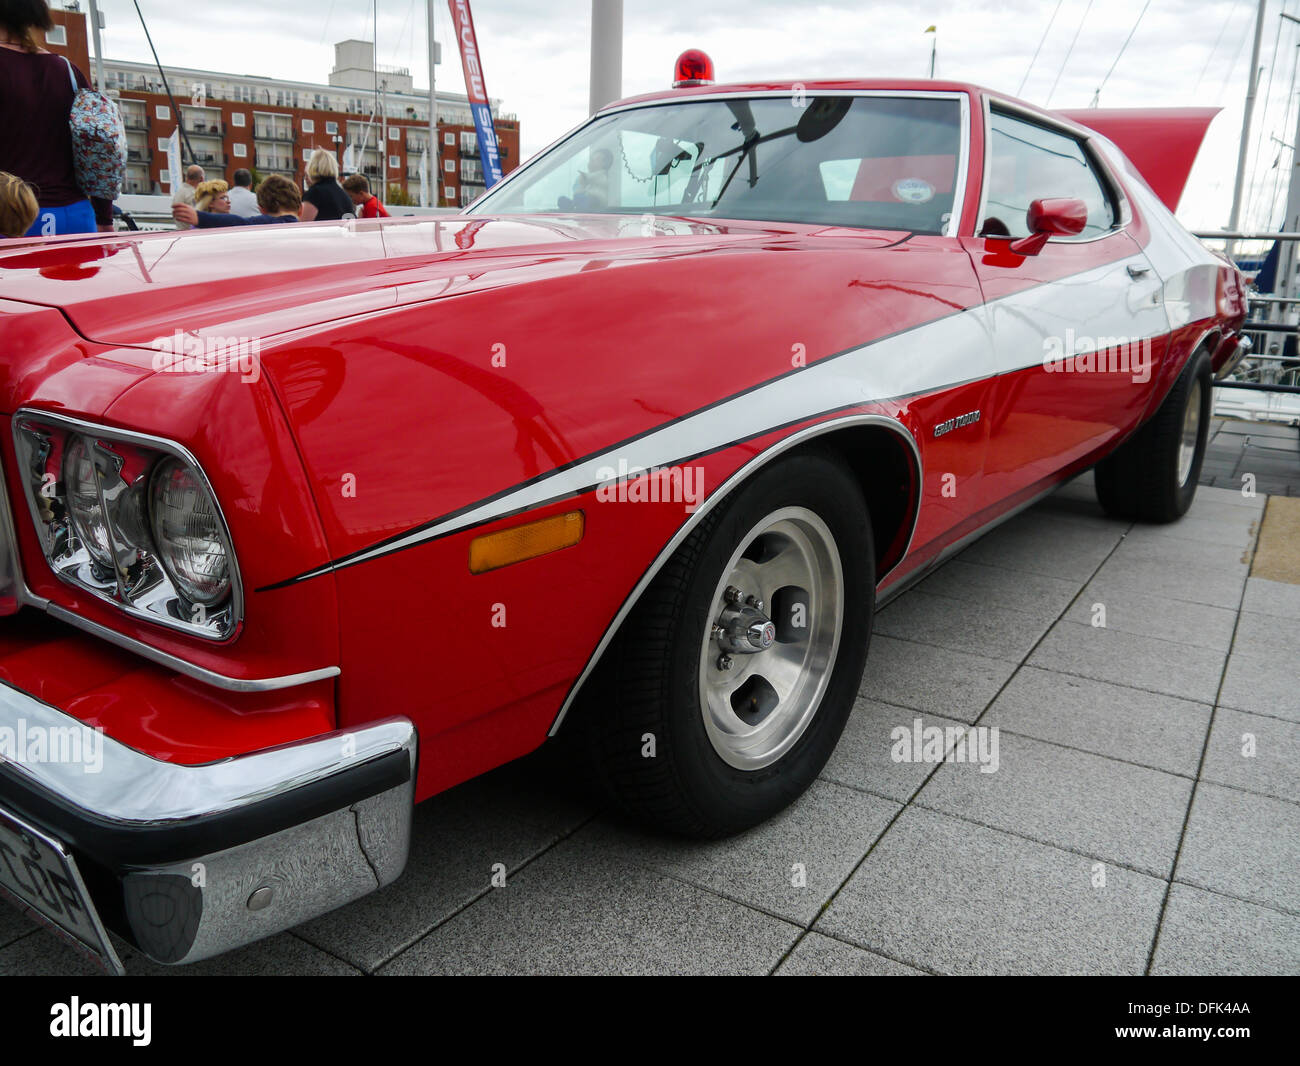 File:1974 Ford Torino from Starsky & Hutch.JPG - Wikimedia Commons